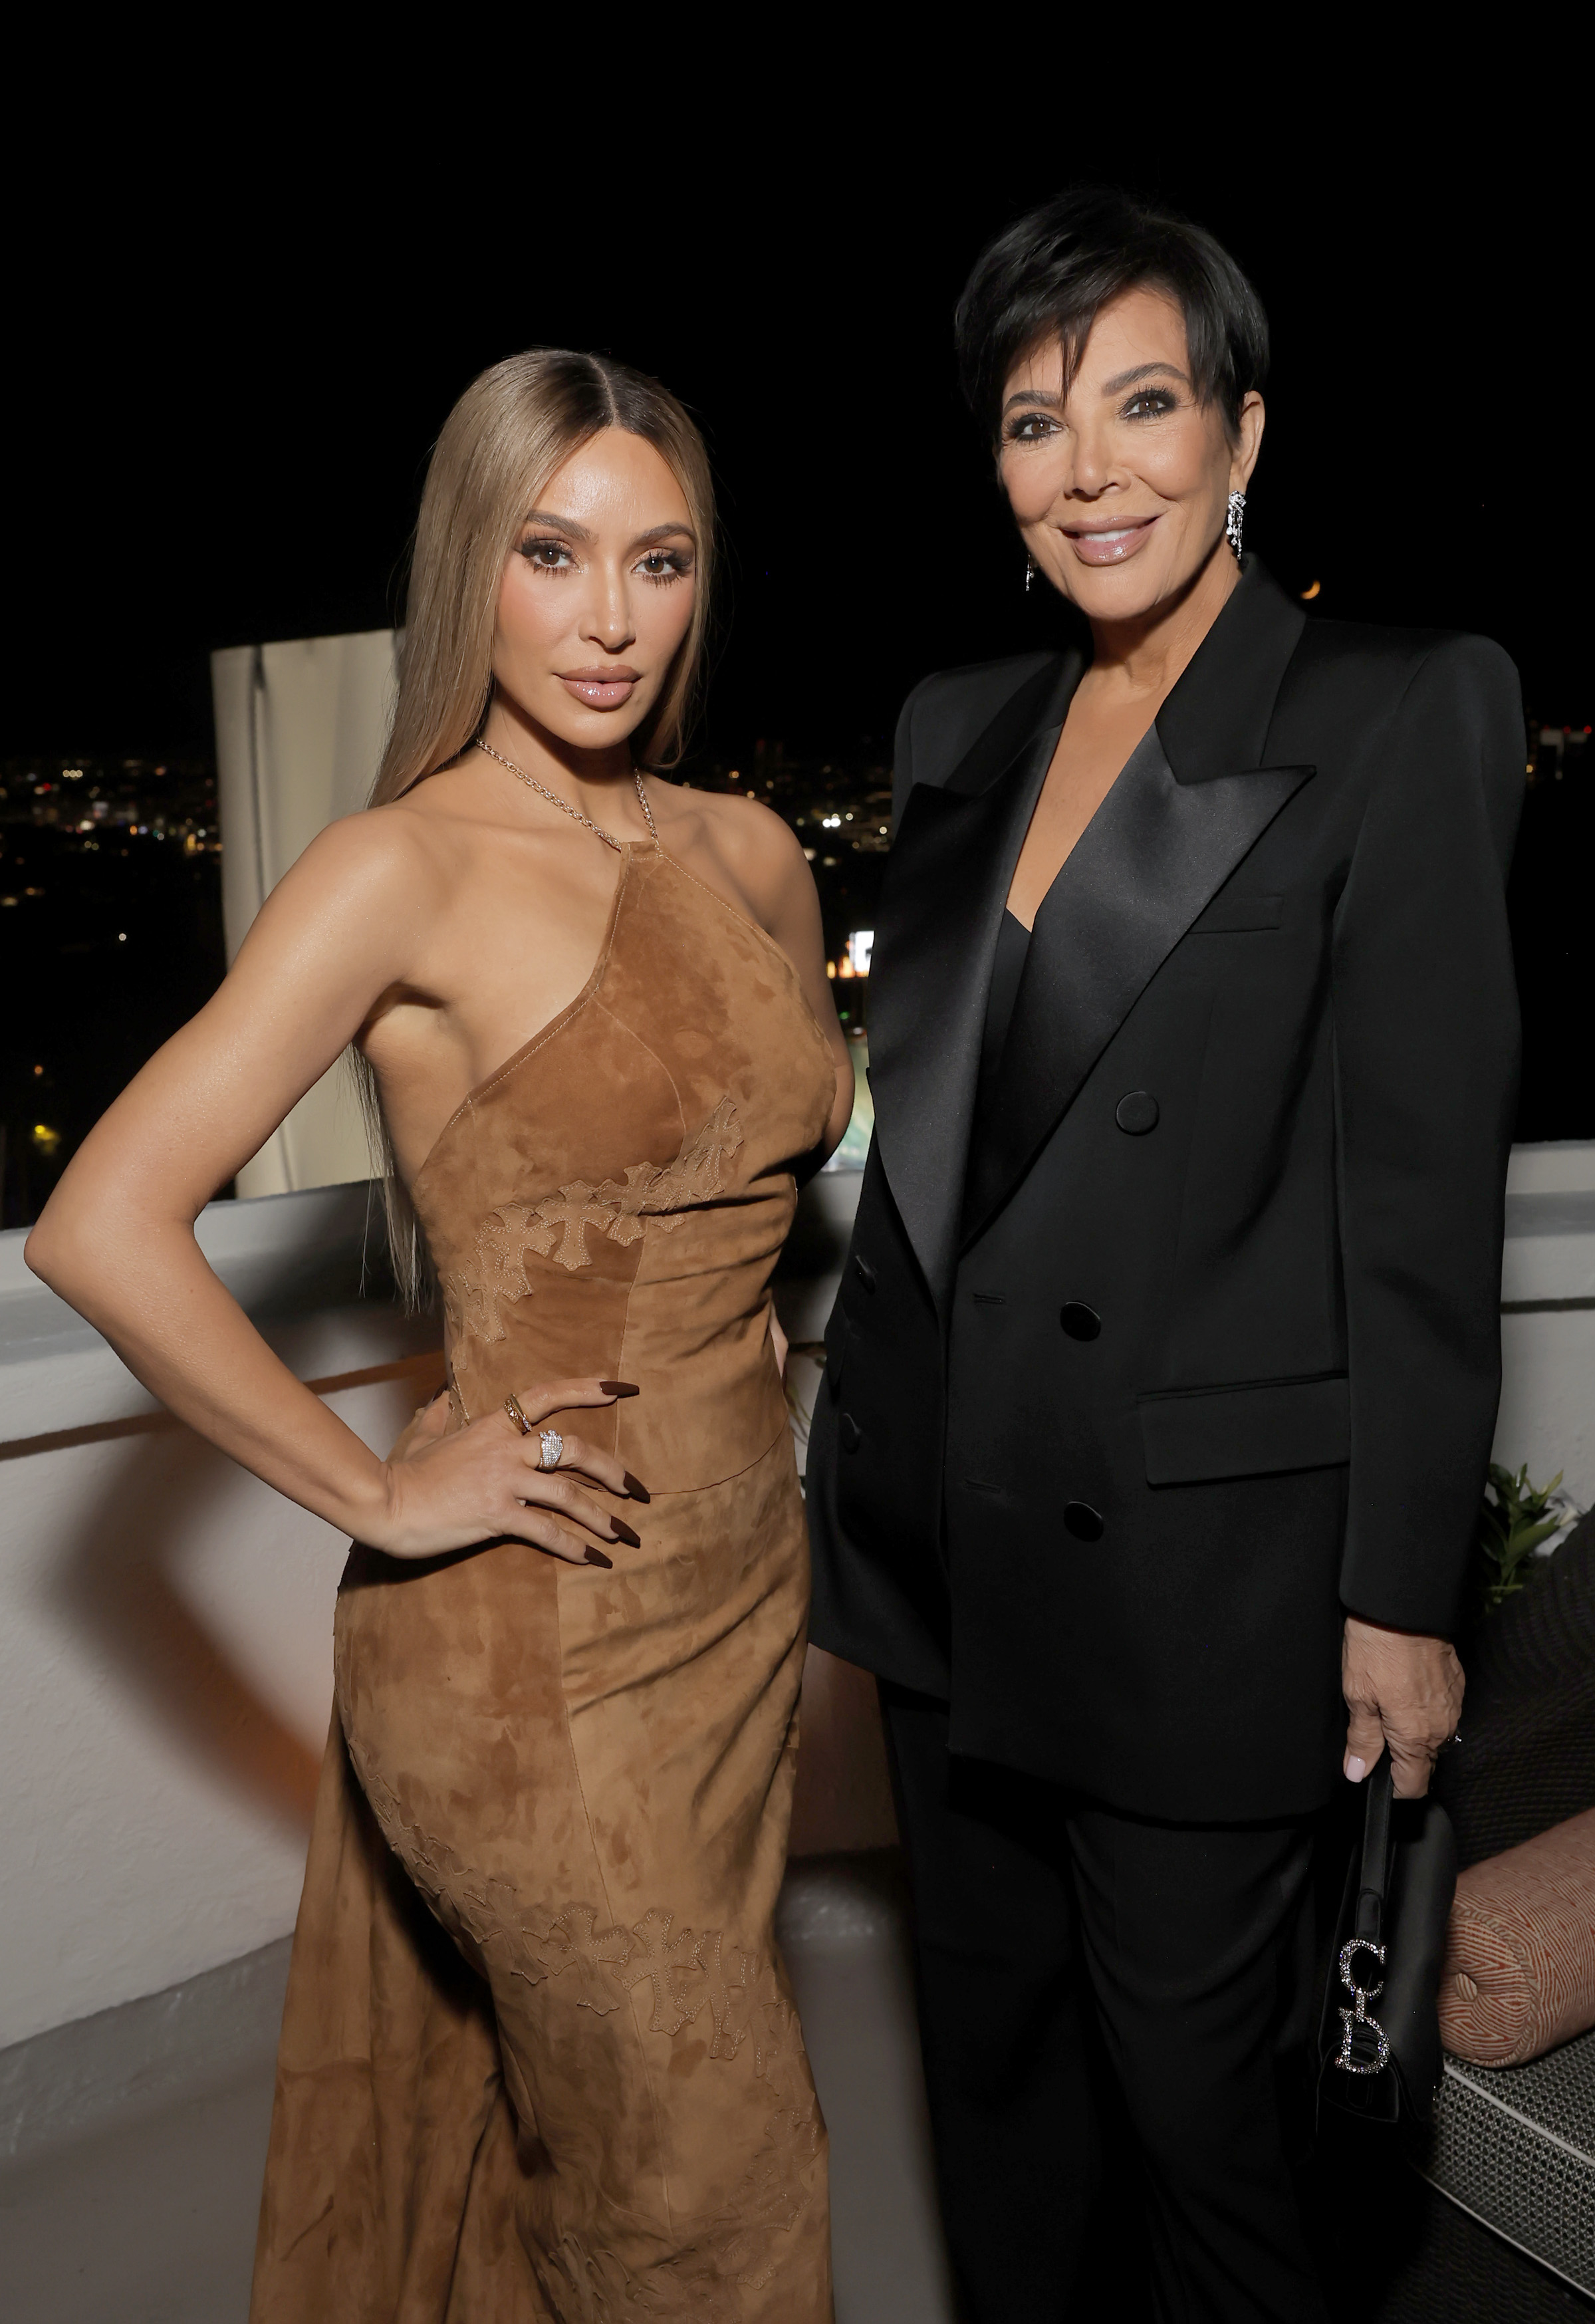 Kim and Kris posing for a photo together at an event